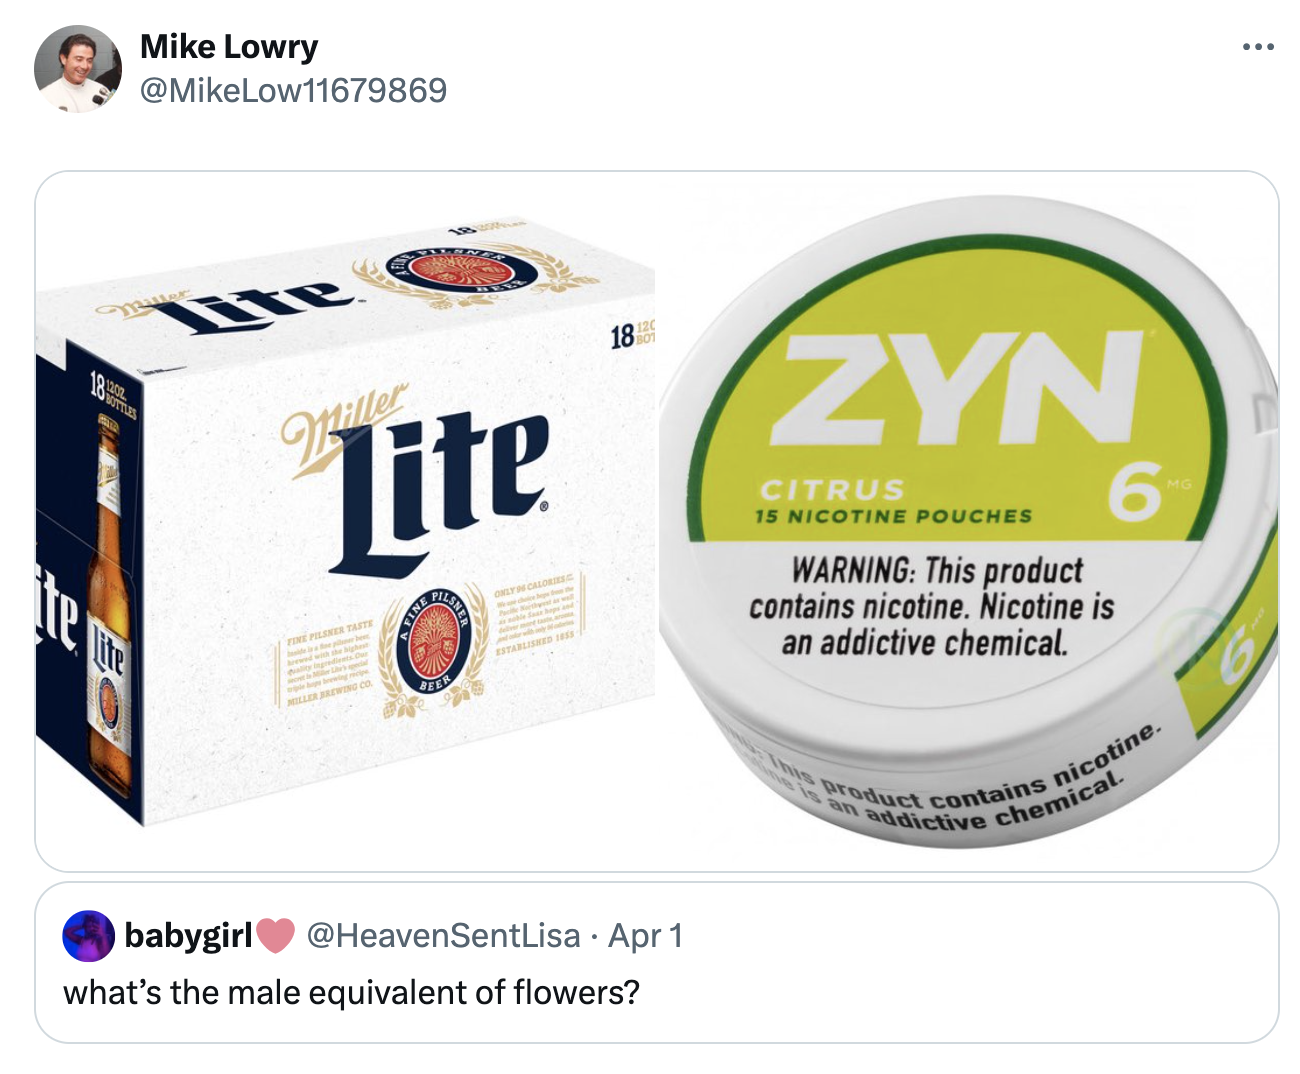 box - Mike Lowry Ite Miller Lite 18 babygirl Apr 1 what's the male equivalent of flowers? Zyn Citrus 15 Nicotine Pouches Warning This product contains nicotine. Nicotine is an addictive chemical. 6 product contains nicotine. an addictive chemical.